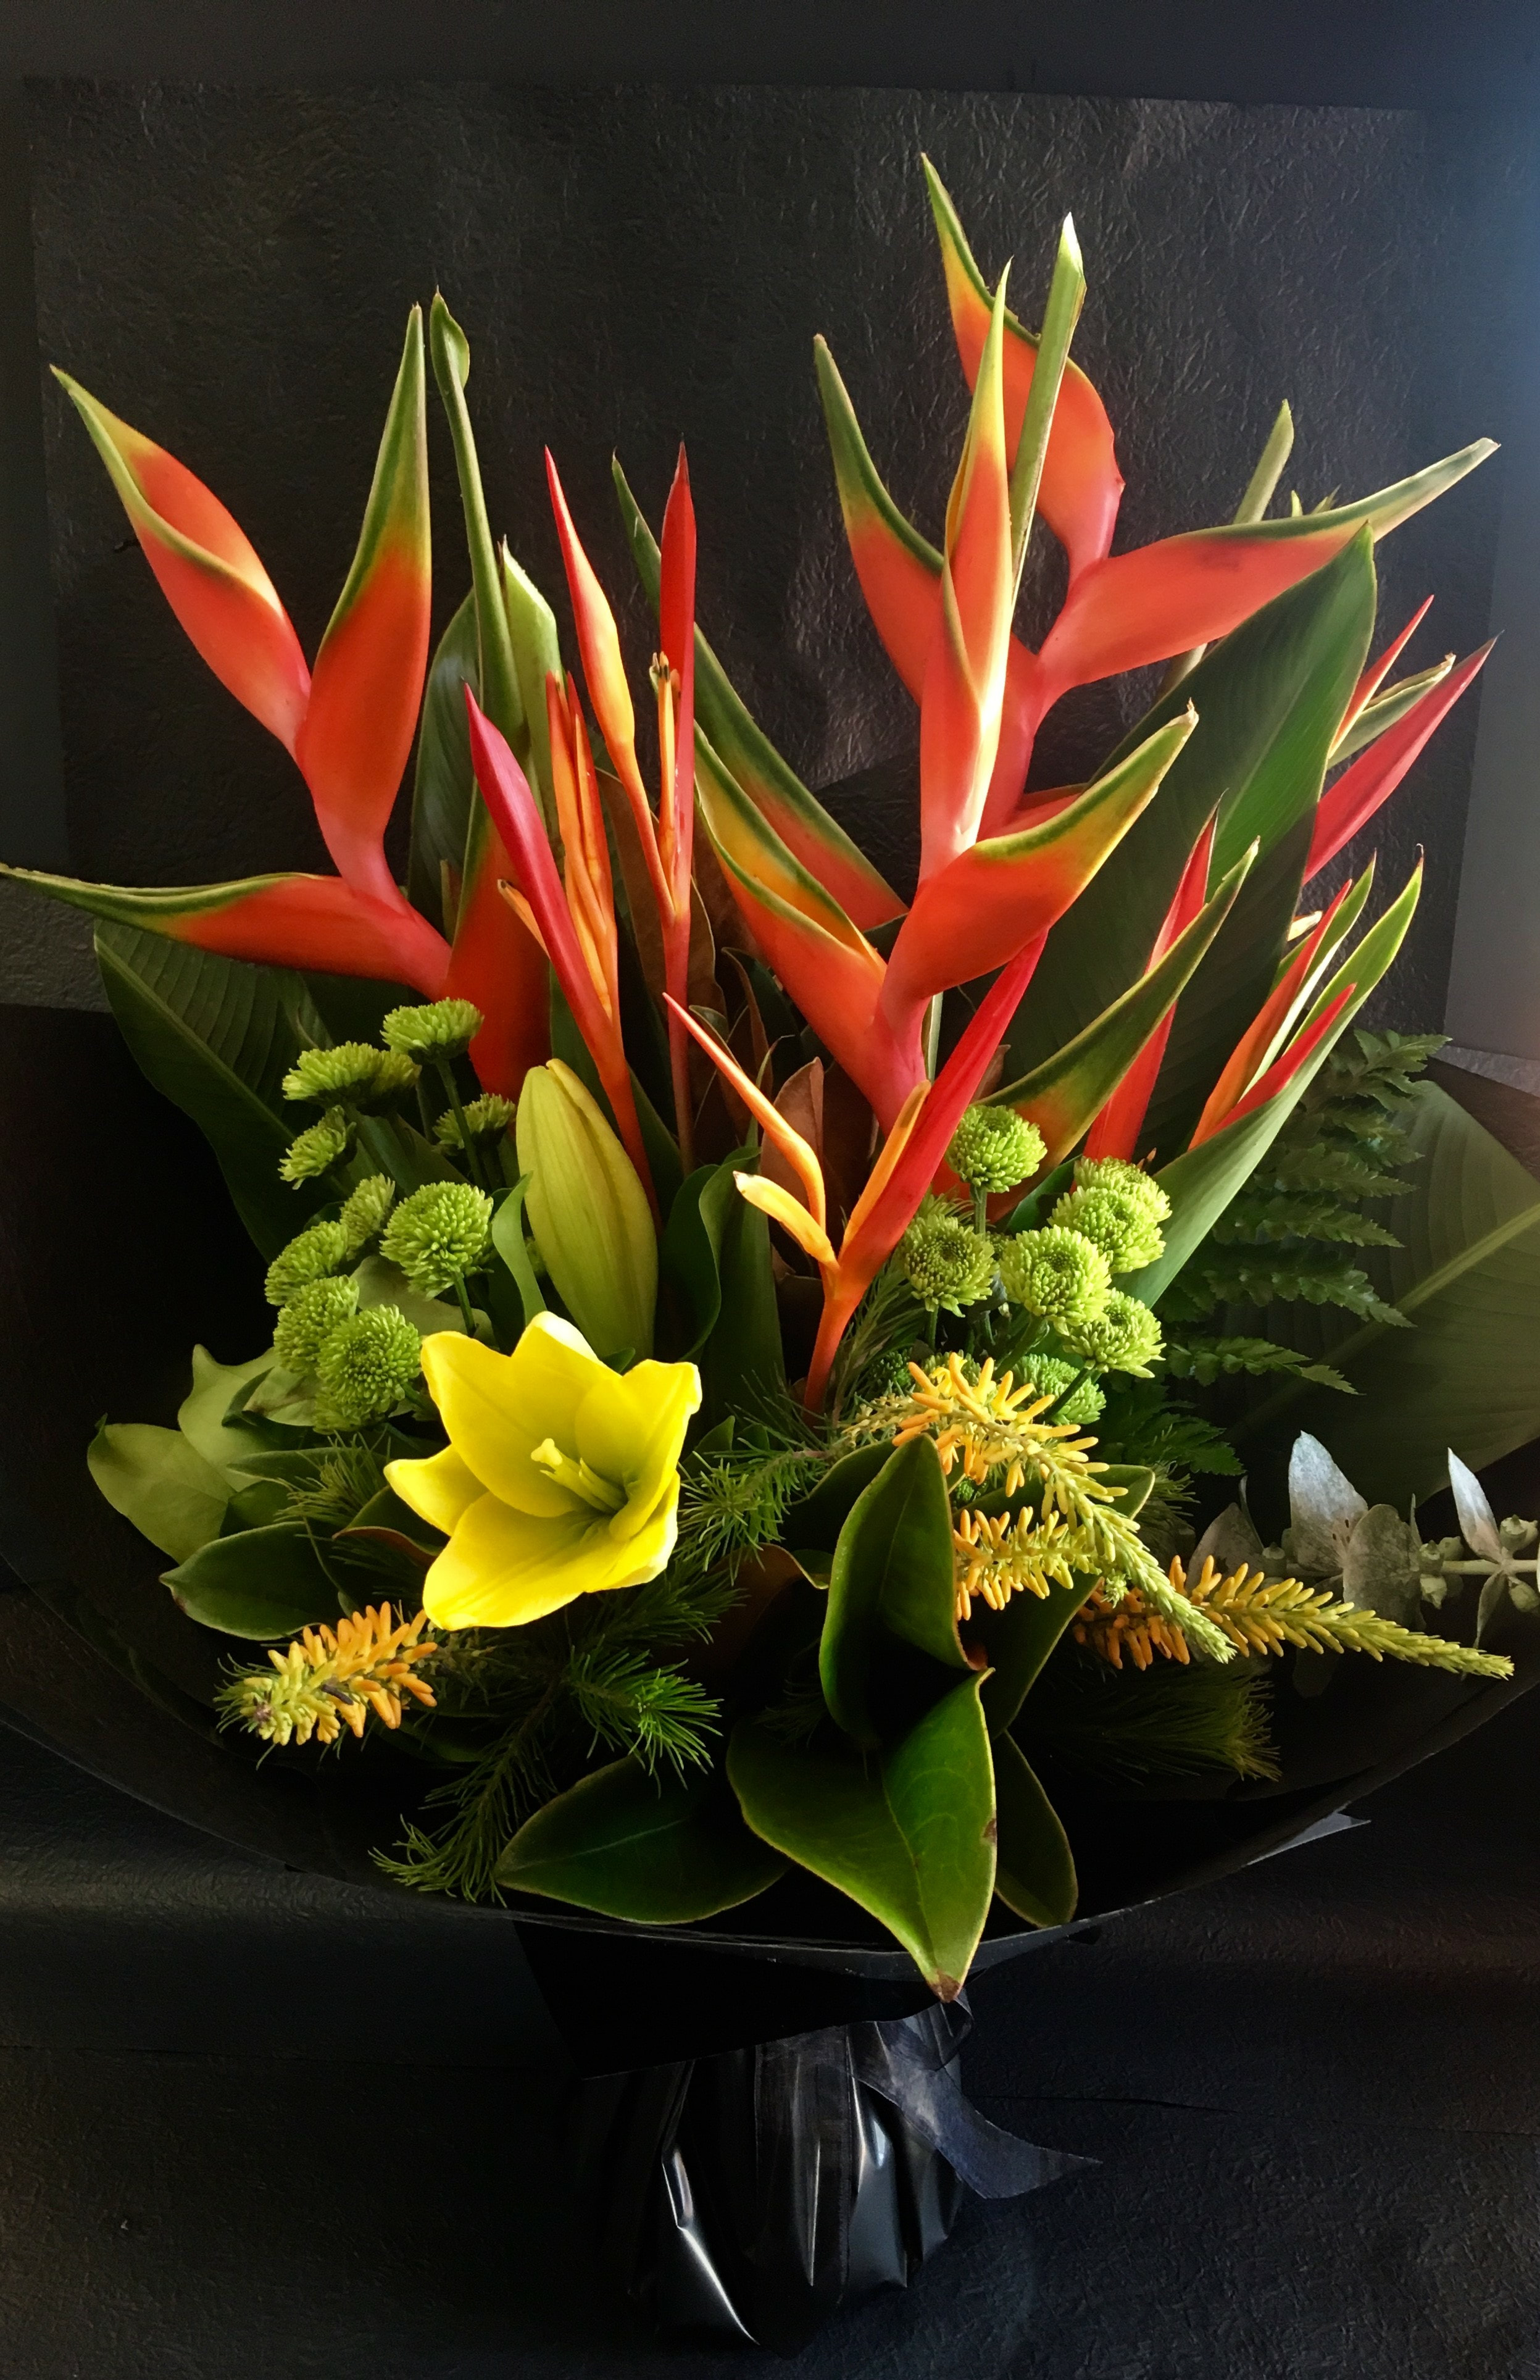 Modern style bouquet with bright colourful flowers. Designed in Kununurra.